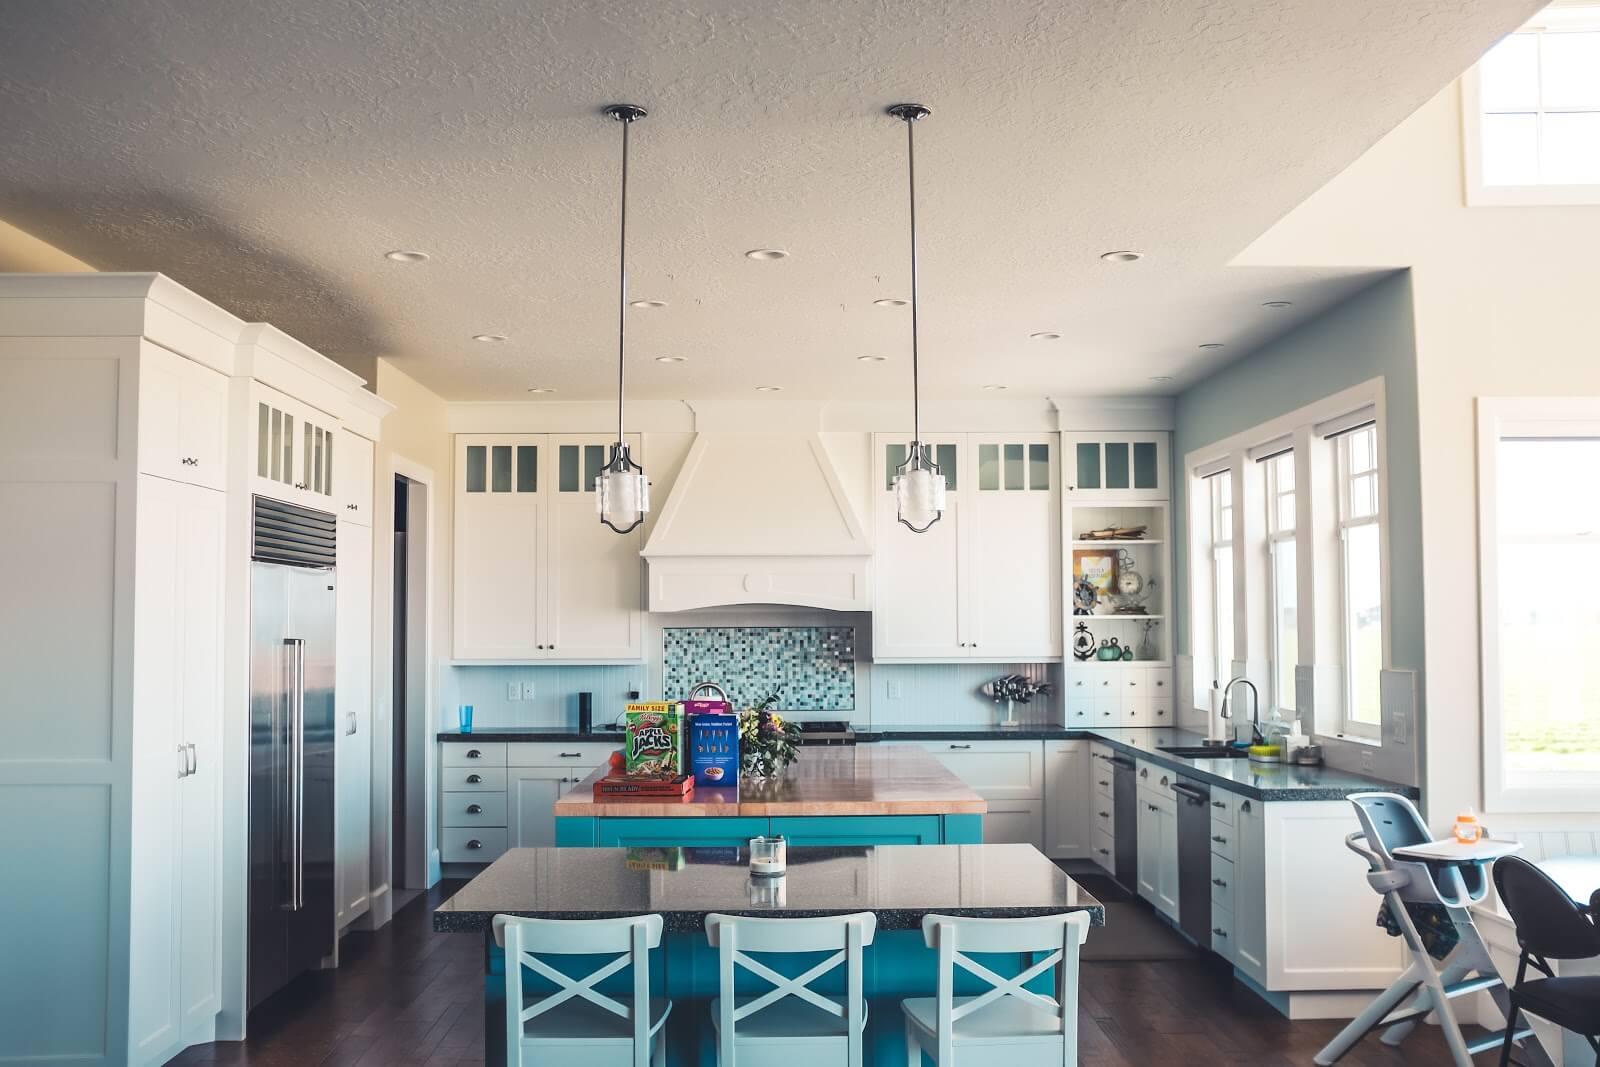 HomeAway Payments: A modern beach-themed kitchen